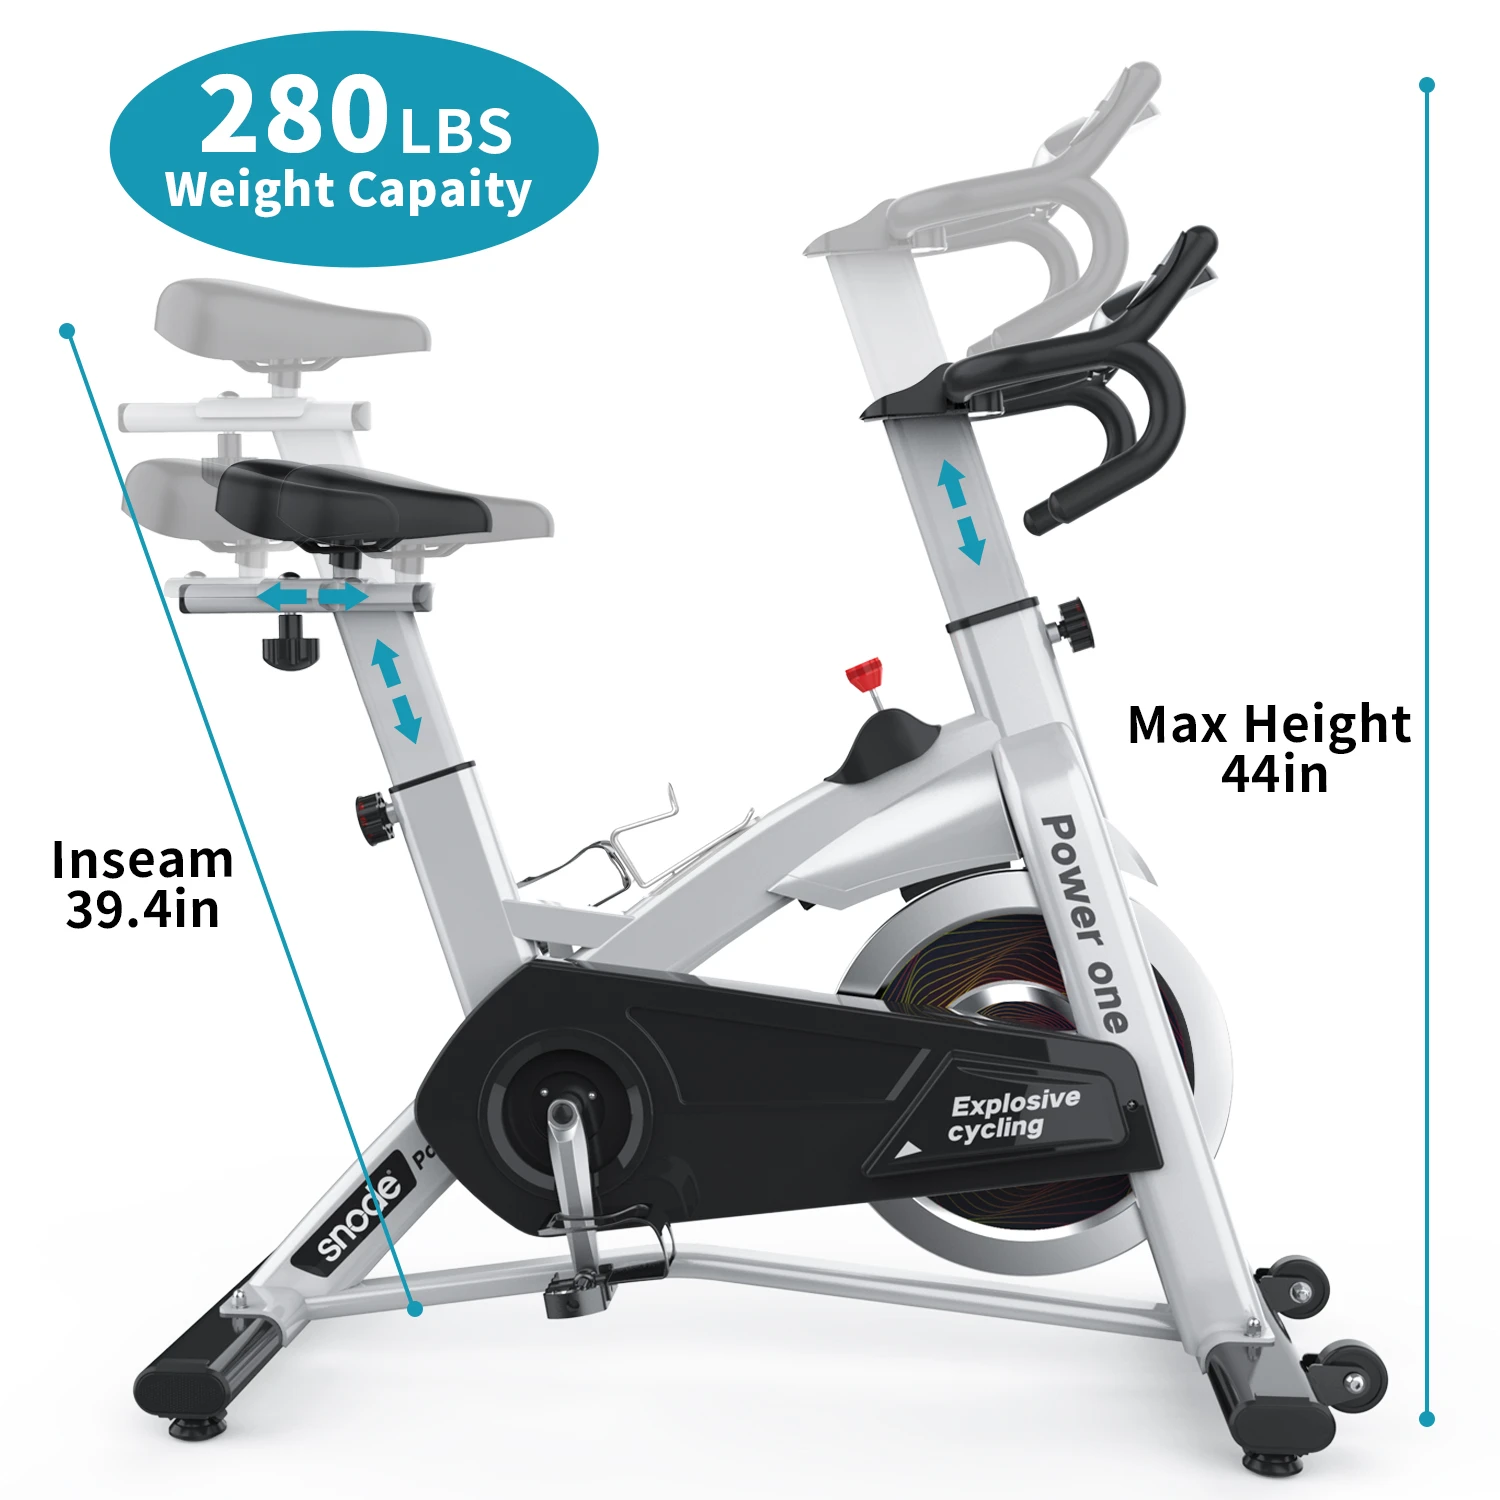 SNODE 8729 Indoor Cycling Bike Stationary Exercise Bike with Comfortable Seat CushionHot Sales Home Gym Exercise Bike